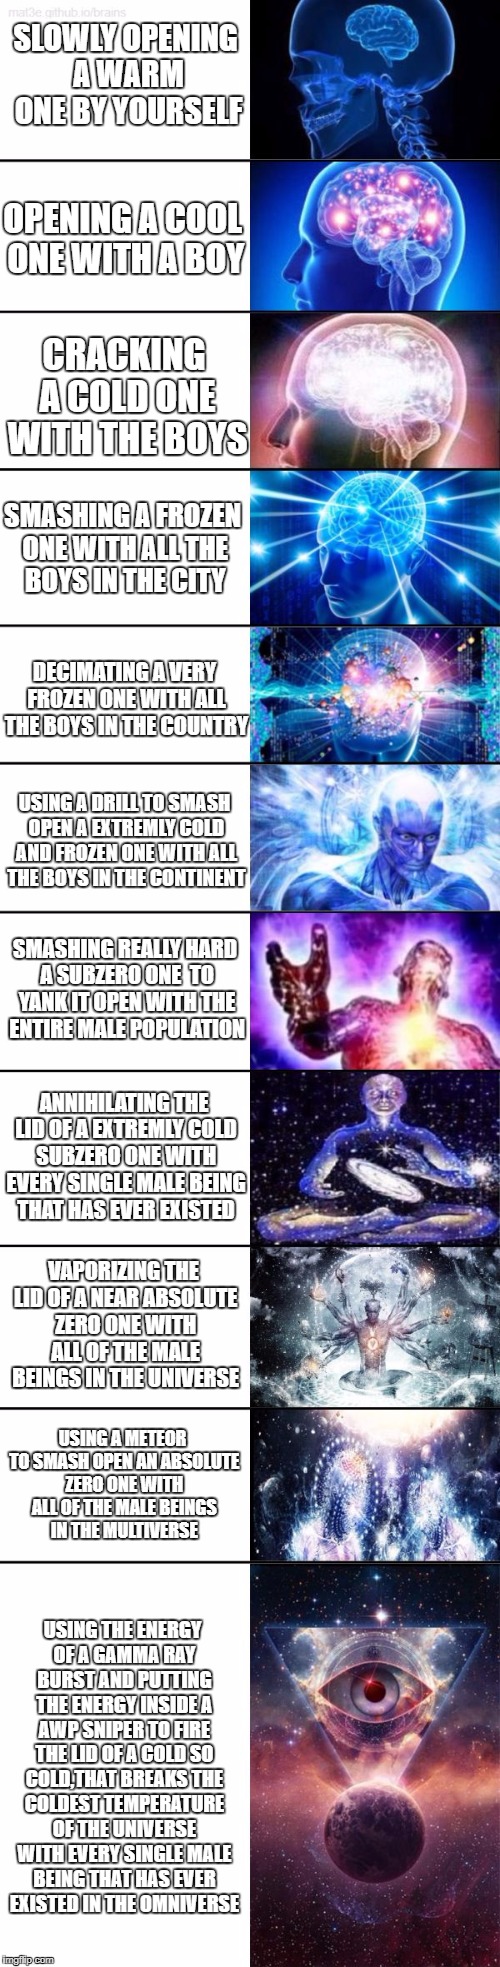 My ultimate expanding brain meme! | SLOWLY OPENING A WARM ONE BY YOURSELF; OPENING A COOL ONE WITH A BOY; CRACKING A COLD ONE WITH THE BOYS; SMASHING A FROZEN ONE WITH ALL THE BOYS IN THE CITY; DECIMATING A VERY FROZEN ONE WITH ALL THE BOYS IN THE COUNTRY; USING A DRILL TO SMASH OPEN A EXTREMLY COLD AND FROZEN ONE WITH ALL THE BOYS IN THE CONTINENT; SMASHING REALLY HARD A SUBZERO ONE  TO YANK IT OPEN WITH THE ENTIRE MALE POPULATION; ANNIHILATING THE LID OF A EXTREMLY COLD SUBZERO ONE WITH EVERY SINGLE MALE BEING THAT HAS EVER EXISTED; VAPORIZING THE LID OF A NEAR ABSOLUTE ZERO ONE WITH ALL OF THE MALE BEINGS IN THE UNIVERSE; USING A METEOR TO SMASH OPEN AN ABSOLUTE ZERO ONE WITH ALL OF THE MALE BEINGS IN THE MULTIVERSE; USING THE ENERGY OF A GAMMA RAY BURST AND PUTTING THE ENERGY INSIDE A AWP SNIPER TO FIRE THE LID OF A COLD SO COLD,THAT BREAKS THE COLDEST TEMPERATURE OF THE UNIVERSE WITH EVERY SINGLE MALE BEING THAT HAS EVER EXISTED IN THE OMNIVERSE | image tagged in extended expanding brain,cracking open a cold one with the boys | made w/ Imgflip meme maker